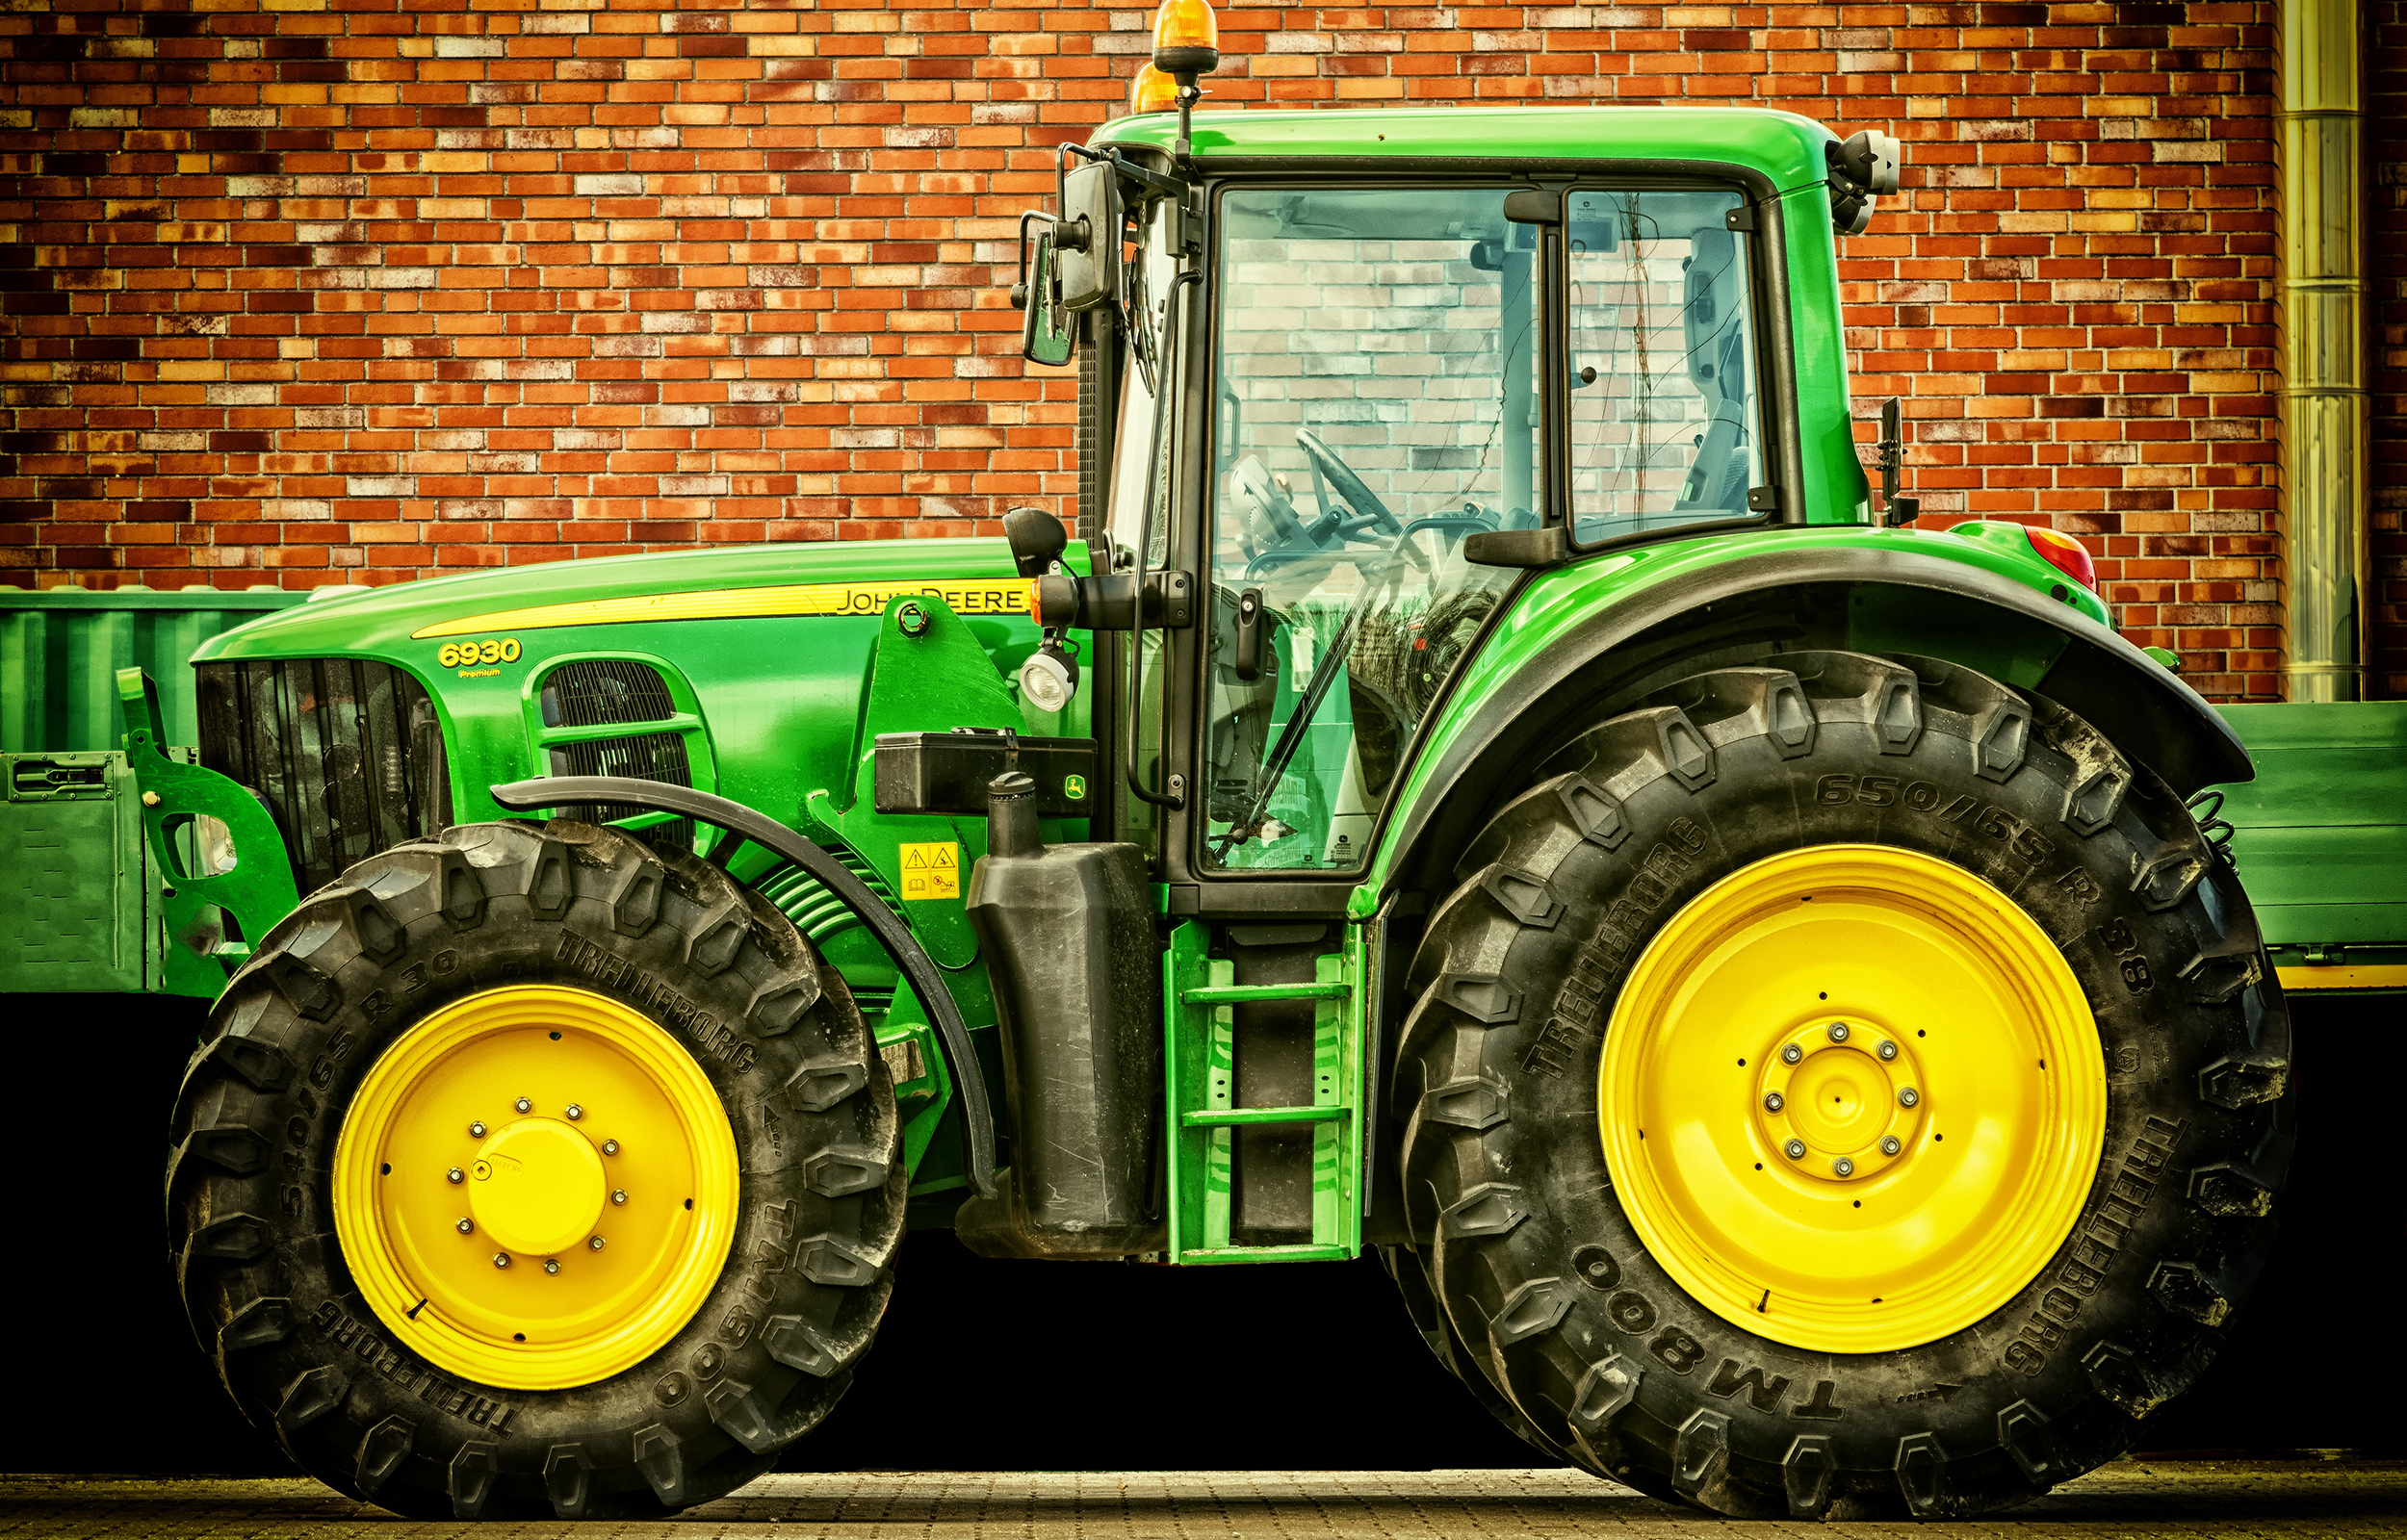 Drive Tractor To Church